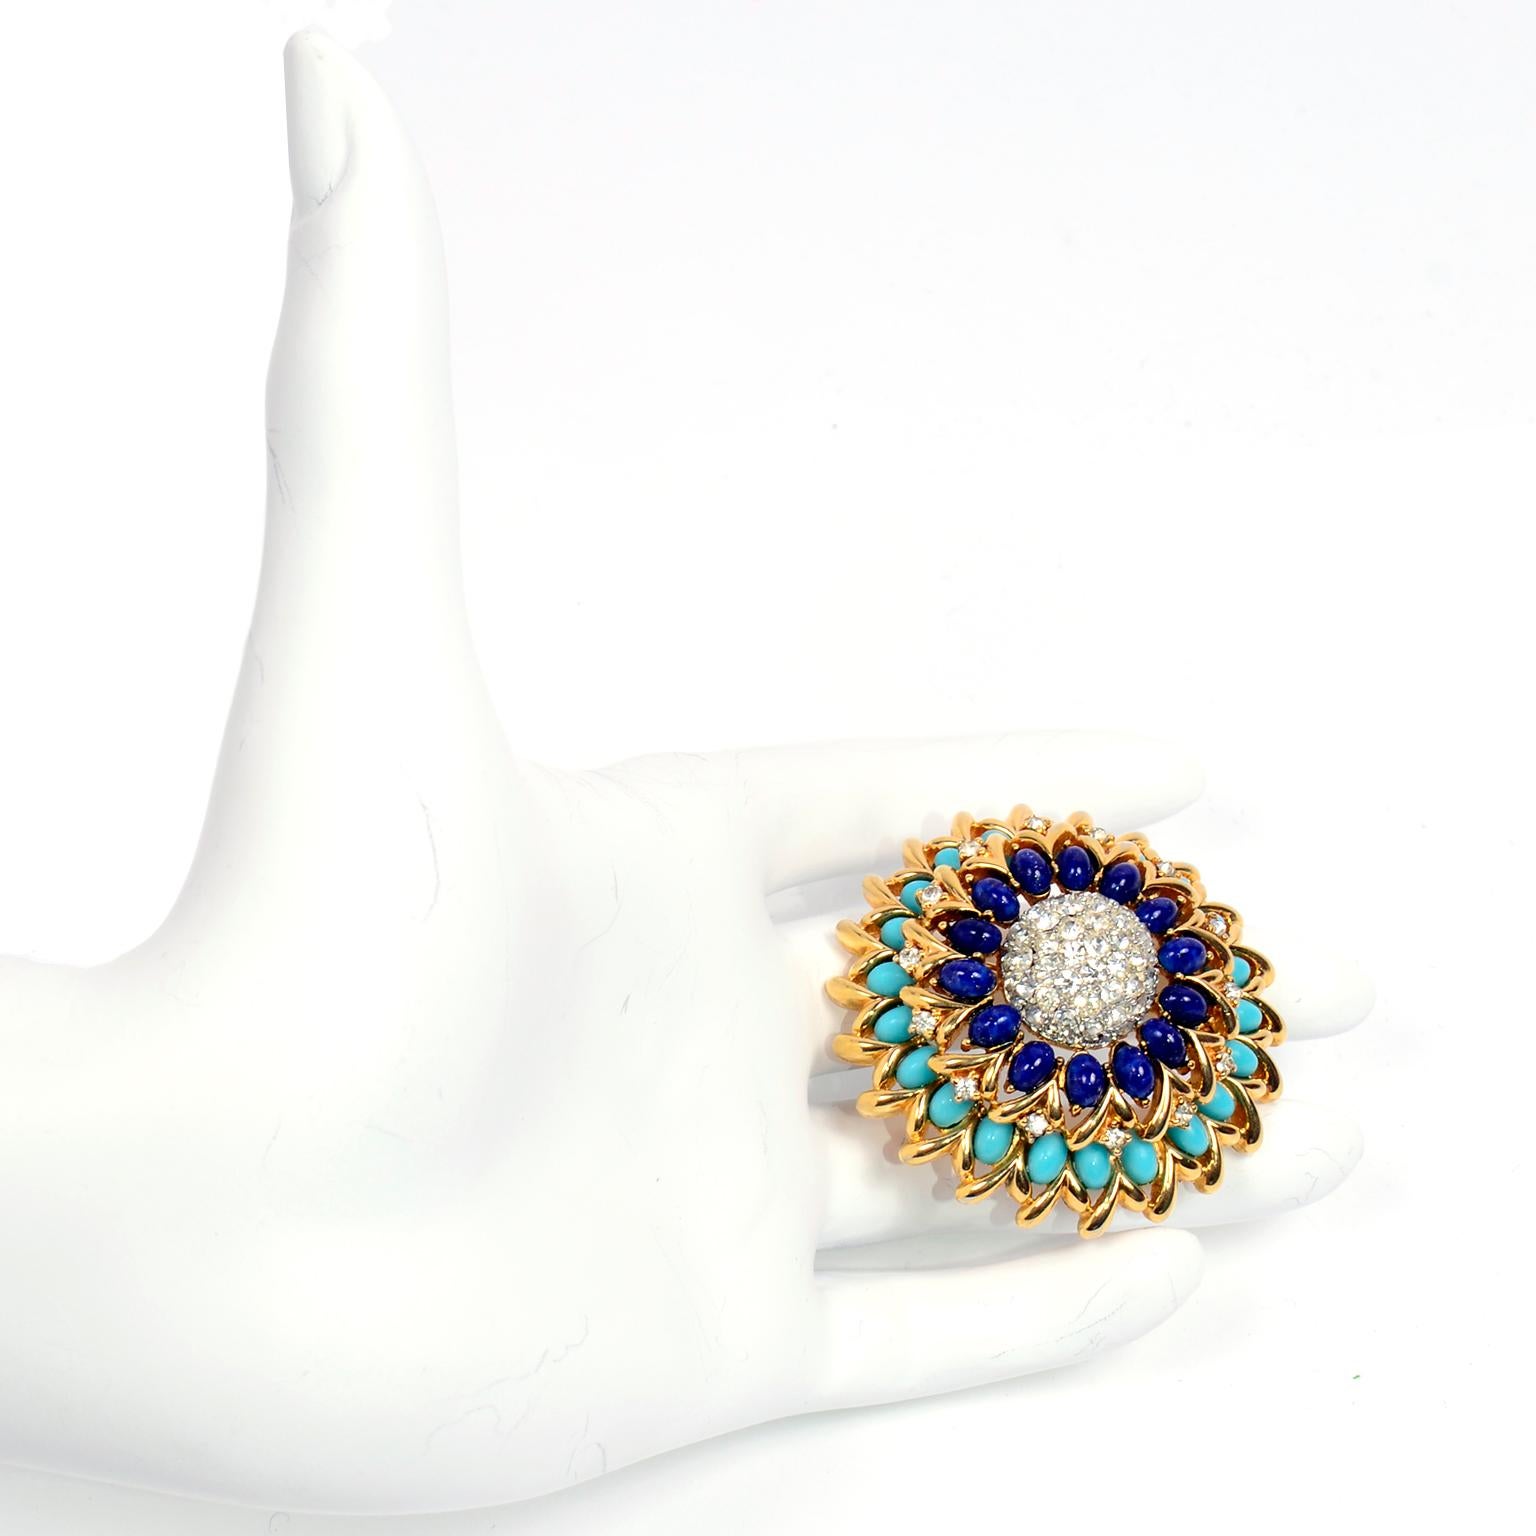 This vintage Jomaz statement brooch has a beautiful gold tone base with turquoise and lapis blue oval stones and clear rhinestones. This domed brooch is in excellent condition and is stunning in person!  The back is marked Jomaz.
DIAMETER: 2